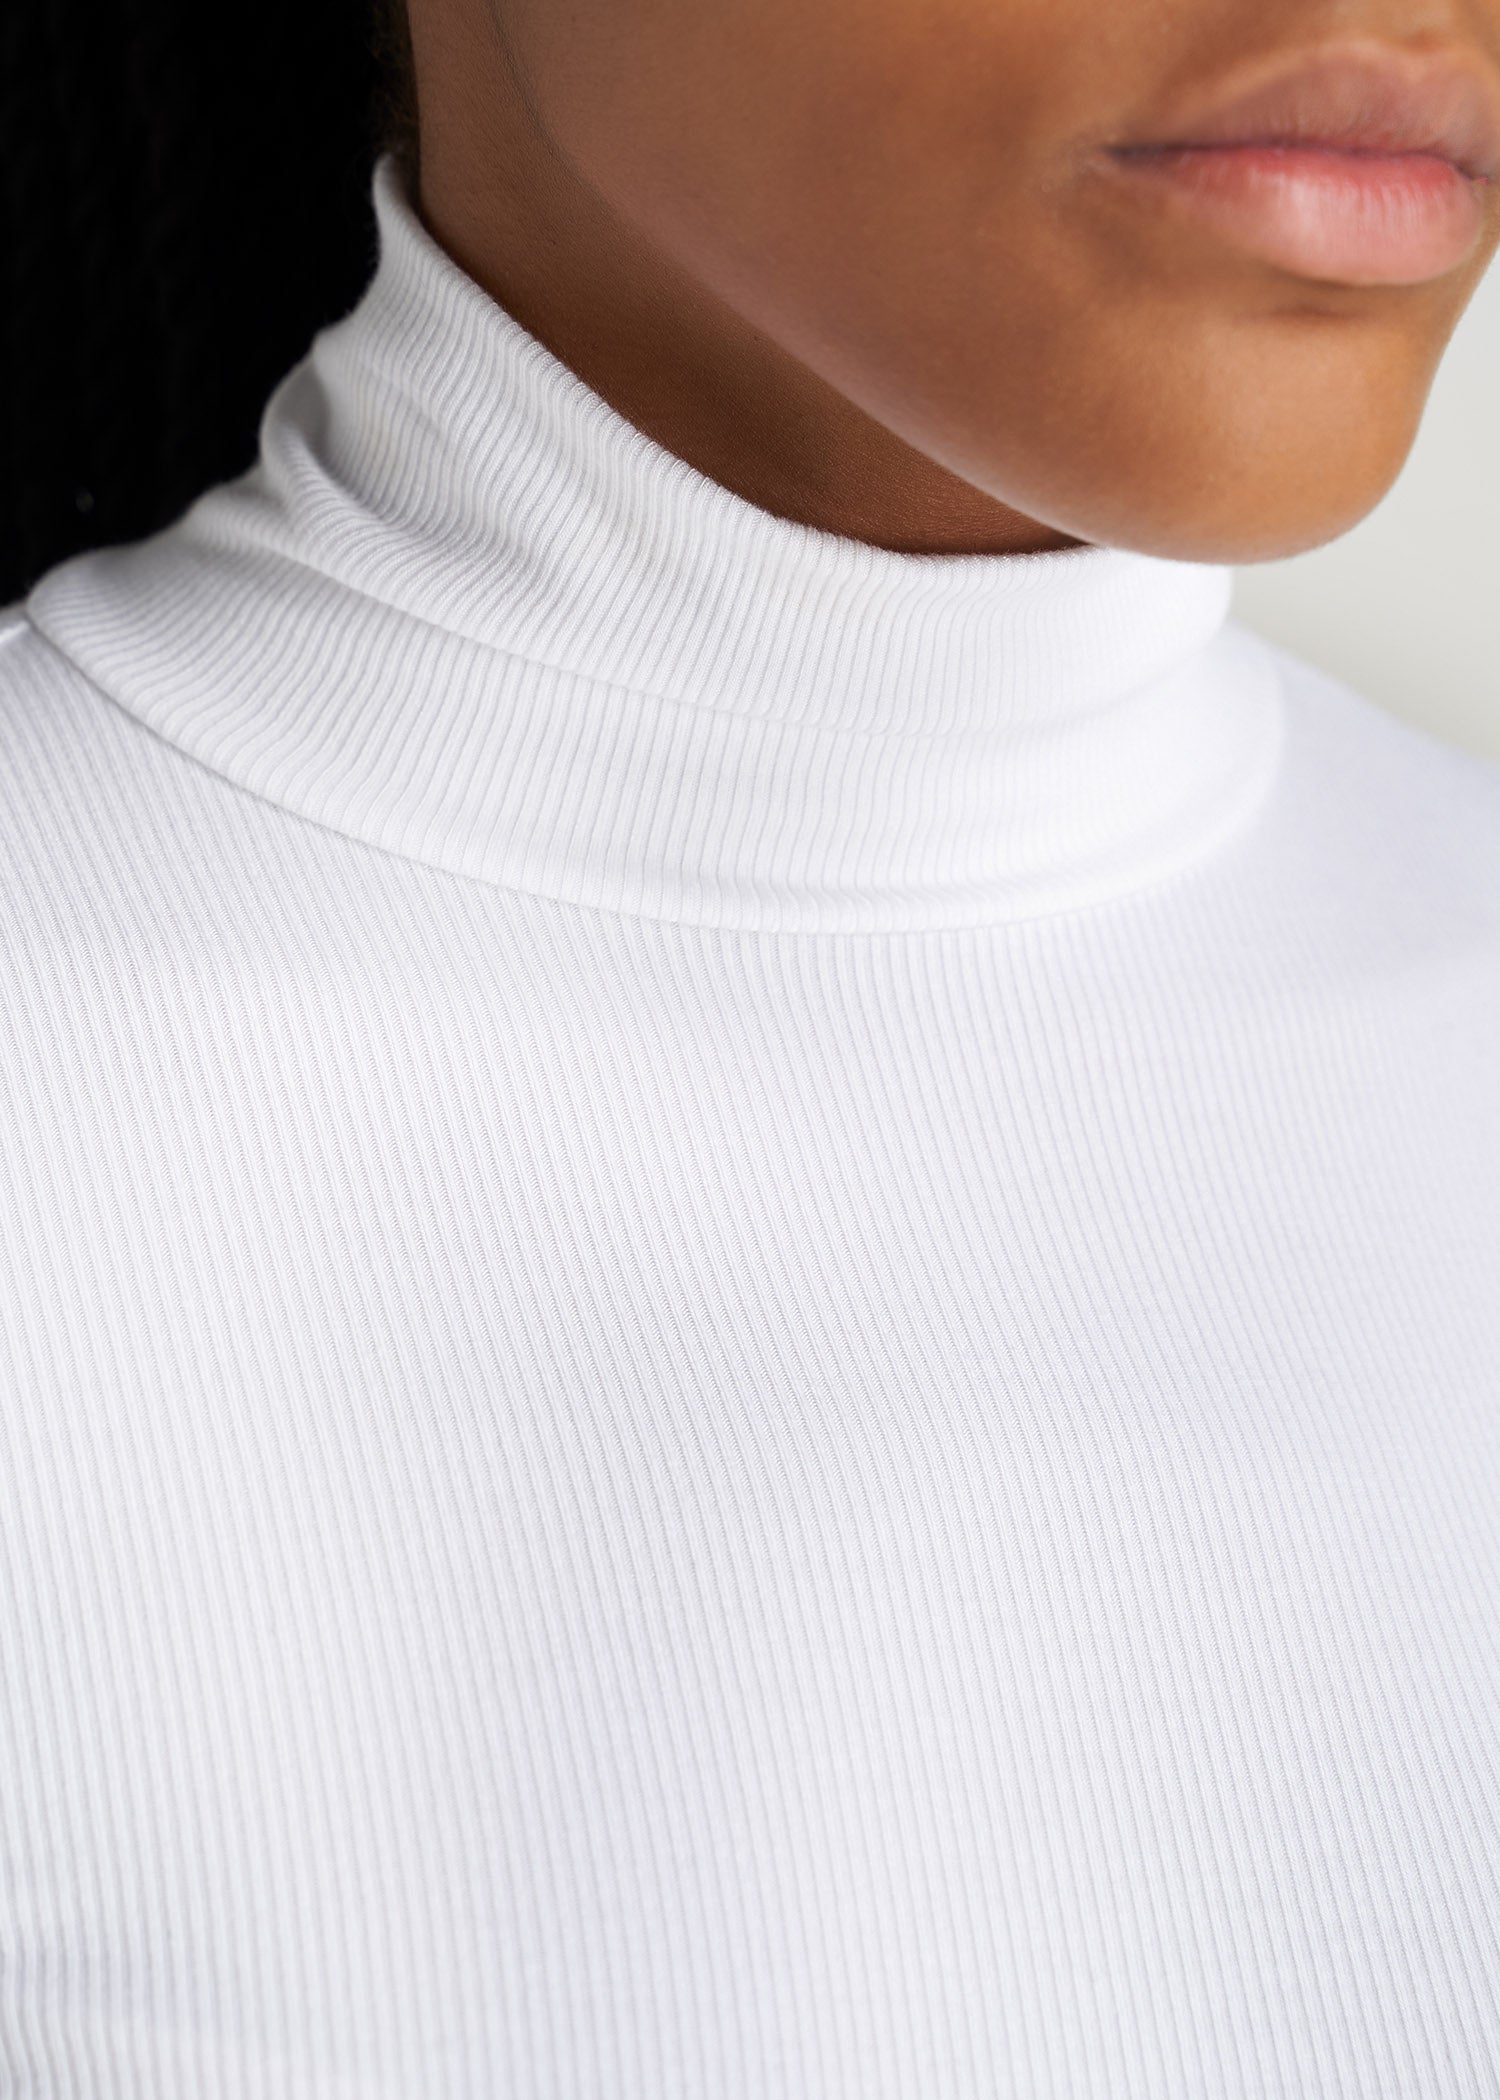 American-Tall-Women-Fitted-LongSleeve-Ribbed-TurtleNeck-White-detail